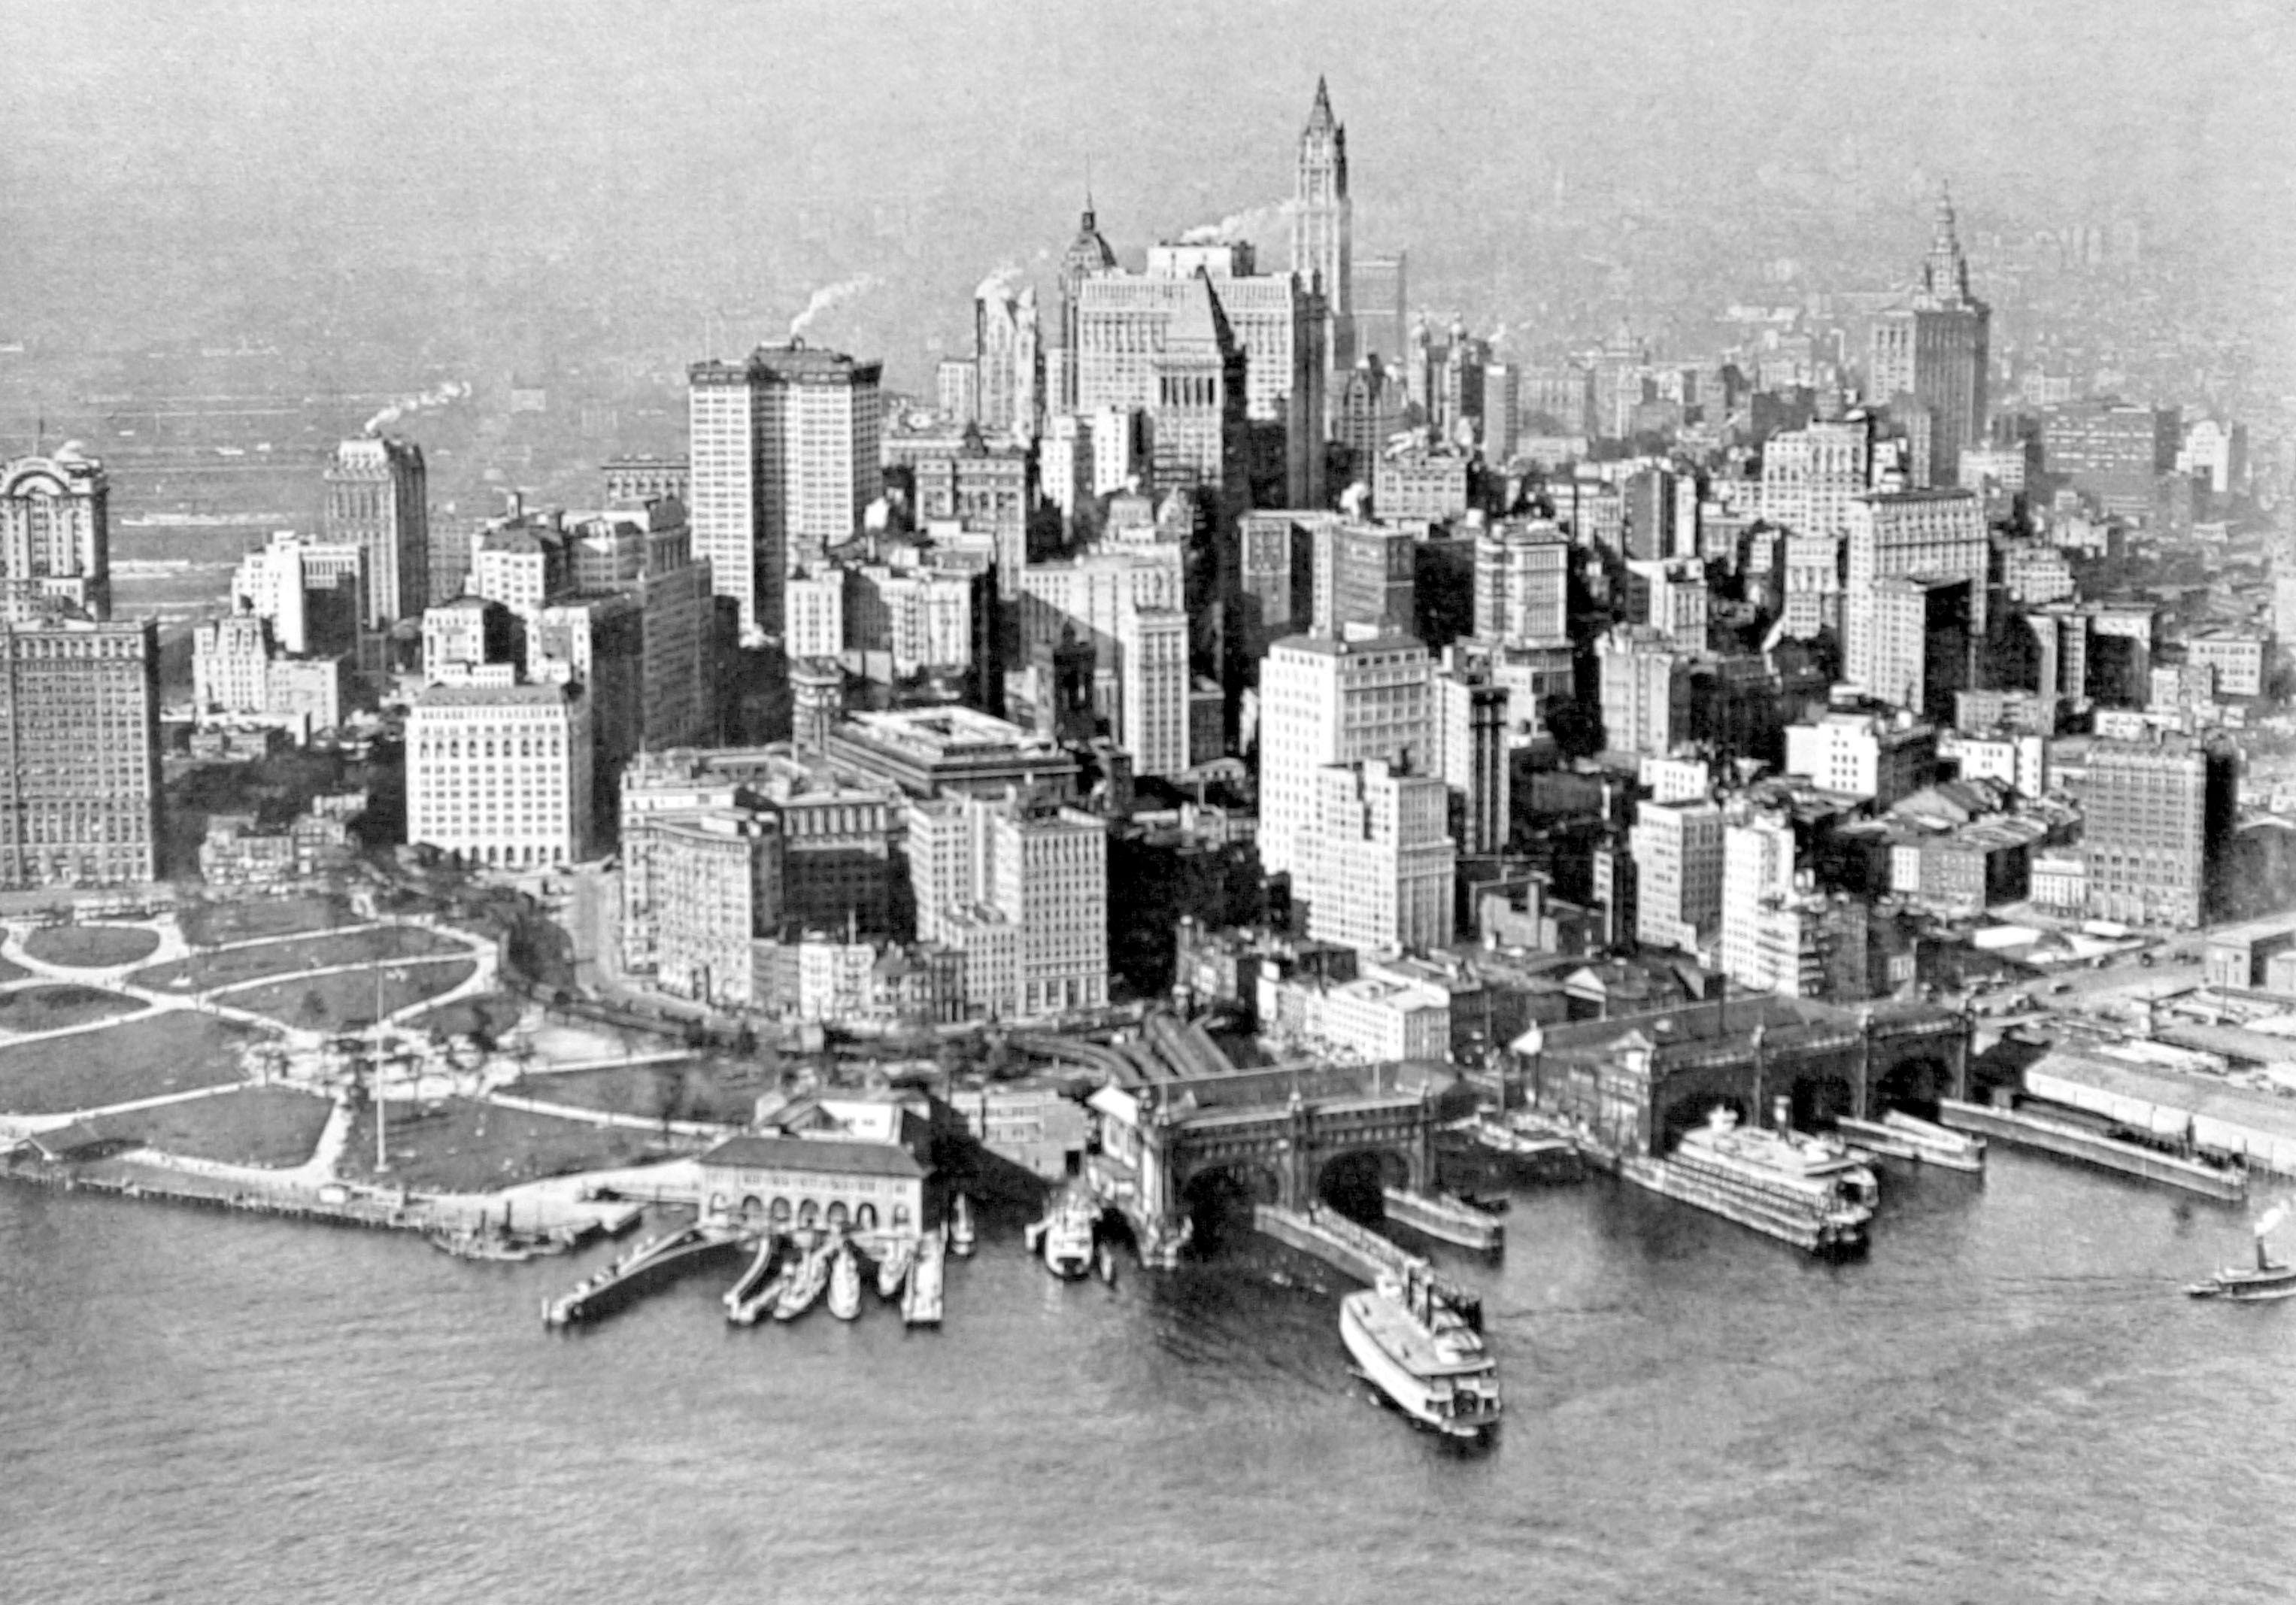 Old New York City Photo NYC Picture Throughout History